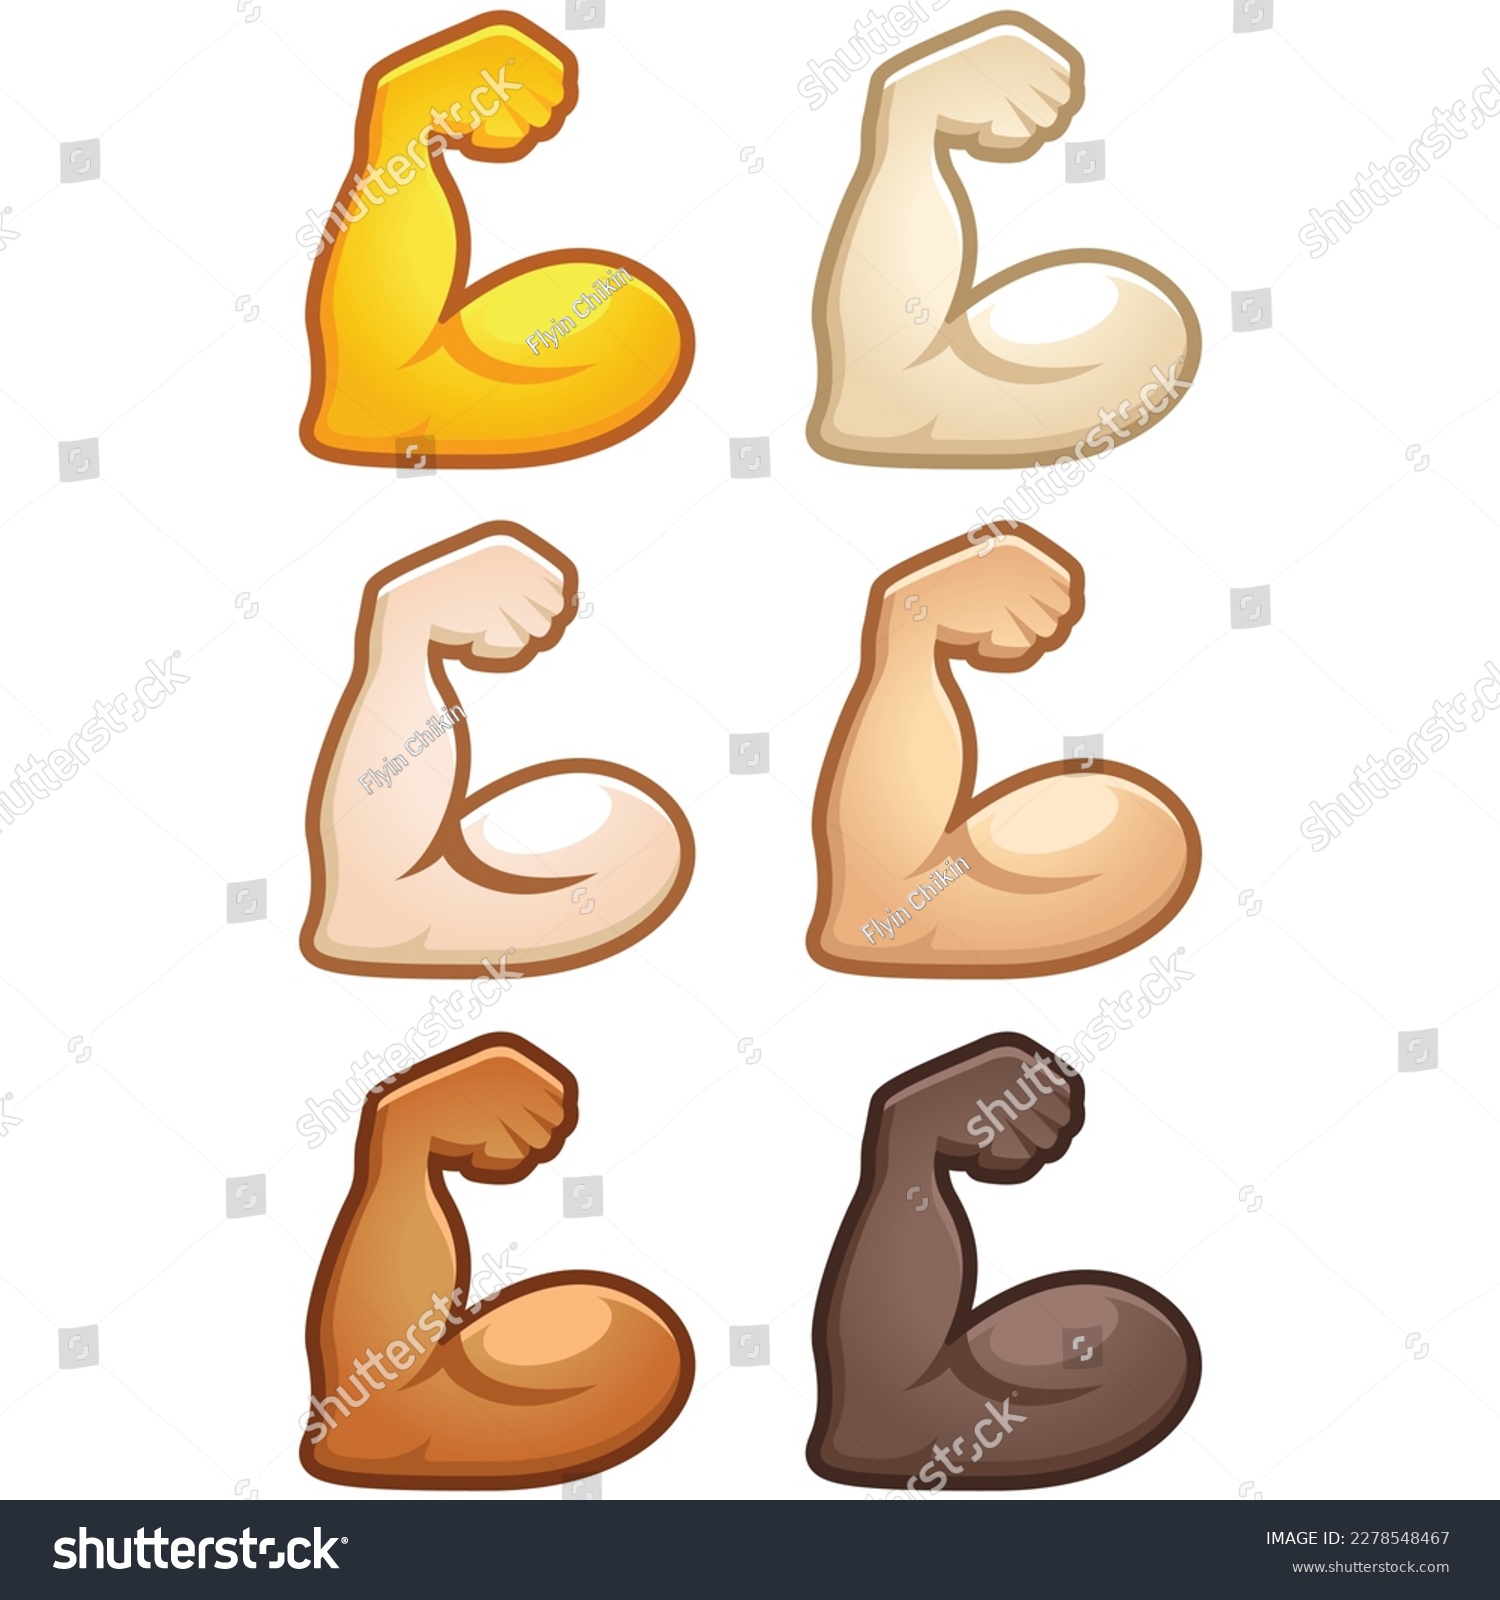 Different mood emoji. Emotional flex bicep muscle emoji hand set of various skin tonescute cartoon stylized vector cartoon illustration icons. Isolated on white background. #2278548467